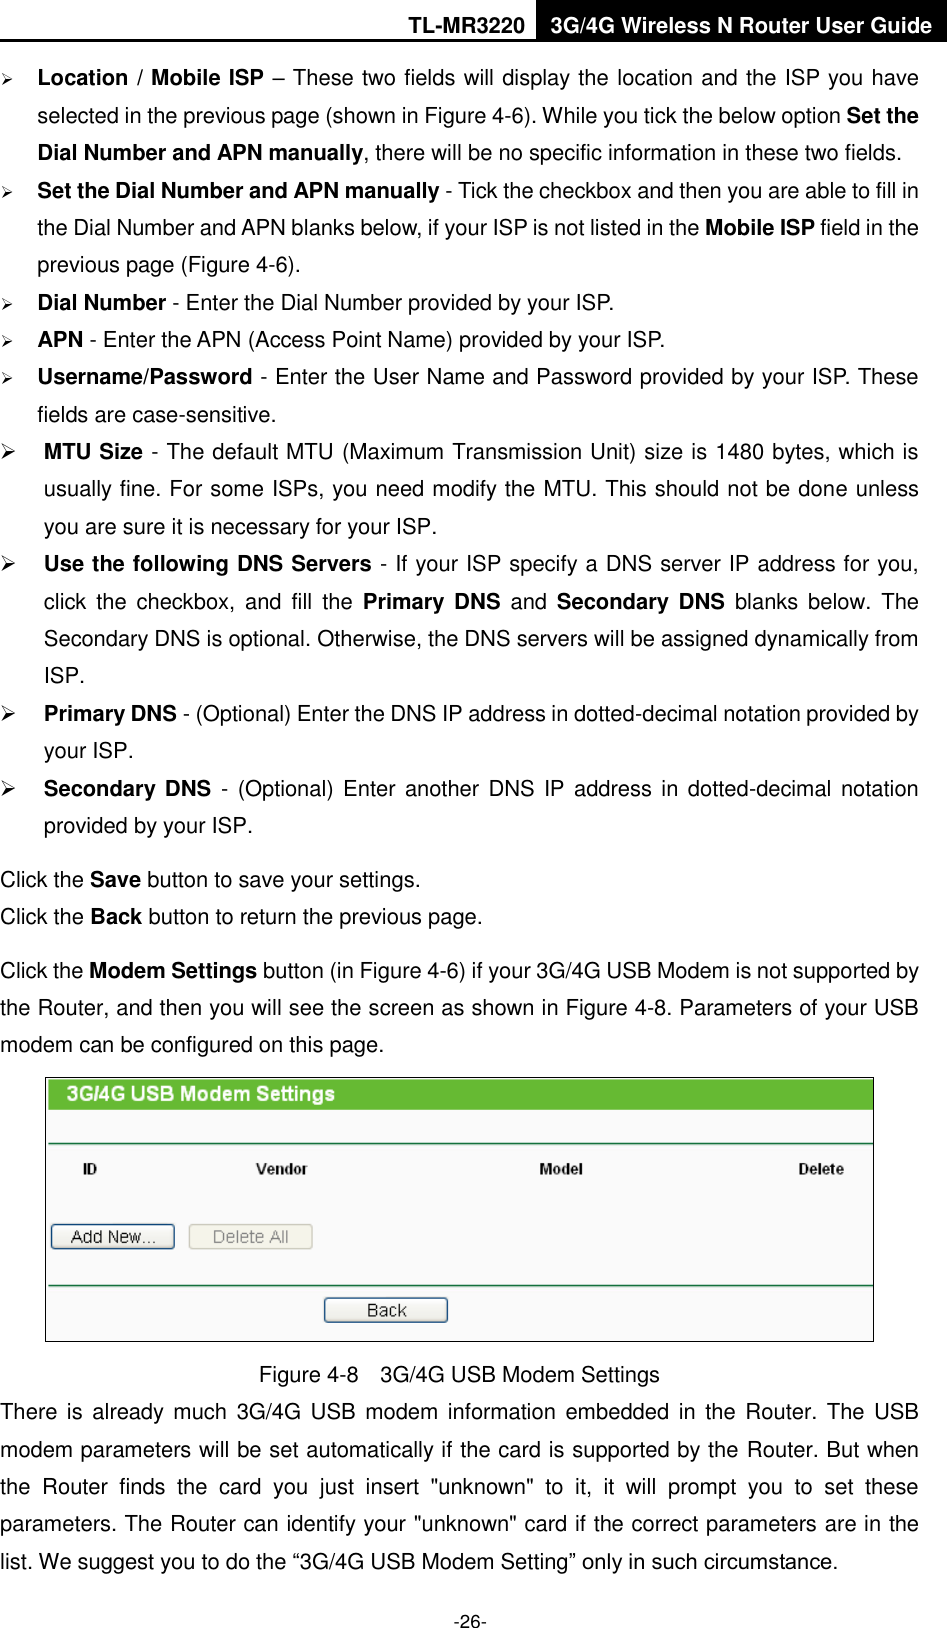 TL-MR3220 3G/4G Wireless N Router User Guide  -26-  Location / Mobile ISP – These two fields will display the location and the ISP you have selected in the previous page (shown in Figure 4-6). While you tick the below option Set the Dial Number and APN manually, there will be no specific information in these two fields.  Set the Dial Number and APN manually - Tick the checkbox and then you are able to fill in the Dial Number and APN blanks below, if your ISP is not listed in the Mobile ISP field in the previous page (Figure 4-6).  Dial Number - Enter the Dial Number provided by your ISP.  APN - Enter the APN (Access Point Name) provided by your ISP.  Username/Password - Enter the User Name and Password provided by your ISP. These fields are case-sensitive.  MTU Size - The default MTU (Maximum Transmission Unit) size is 1480 bytes, which is usually fine. For some ISPs, you need modify the MTU. This should not be done unless you are sure it is necessary for your ISP.  Use the following DNS Servers - If your ISP specify a DNS server IP address for you, click  the  checkbox,  and  fill  the  Primary  DNS  and  Secondary  DNS  blanks  below.  The Secondary DNS is optional. Otherwise, the DNS servers will be assigned dynamically from ISP.  Primary DNS - (Optional) Enter the DNS IP address in dotted-decimal notation provided by your ISP.  Secondary  DNS  -  (Optional) Enter  another DNS  IP address in dotted-decimal notation provided by your ISP. Click the Save button to save your settings. Click the Back button to return the previous page. Click the Modem Settings button (in Figure 4-6) if your 3G/4G USB Modem is not supported by the Router, and then you will see the screen as shown in Figure 4-8. Parameters of your USB modem can be configured on this page.  Figure 4-8  3G/4G USB Modem Settings There is already much 3G/4G  USB  modem  information embedded  in the Router. The  USB modem parameters will be set automatically if the card is supported by the Router. But when the  Router  finds  the  card  you  just  insert  &quot;unknown&quot;  to  it,  it  will  prompt  you  to  set  these parameters. The Router can identify your &quot;unknown&quot; card if the correct parameters are in the list. We suggest you to do the “3G/4G USB Modem Setting” only in such circumstance. 